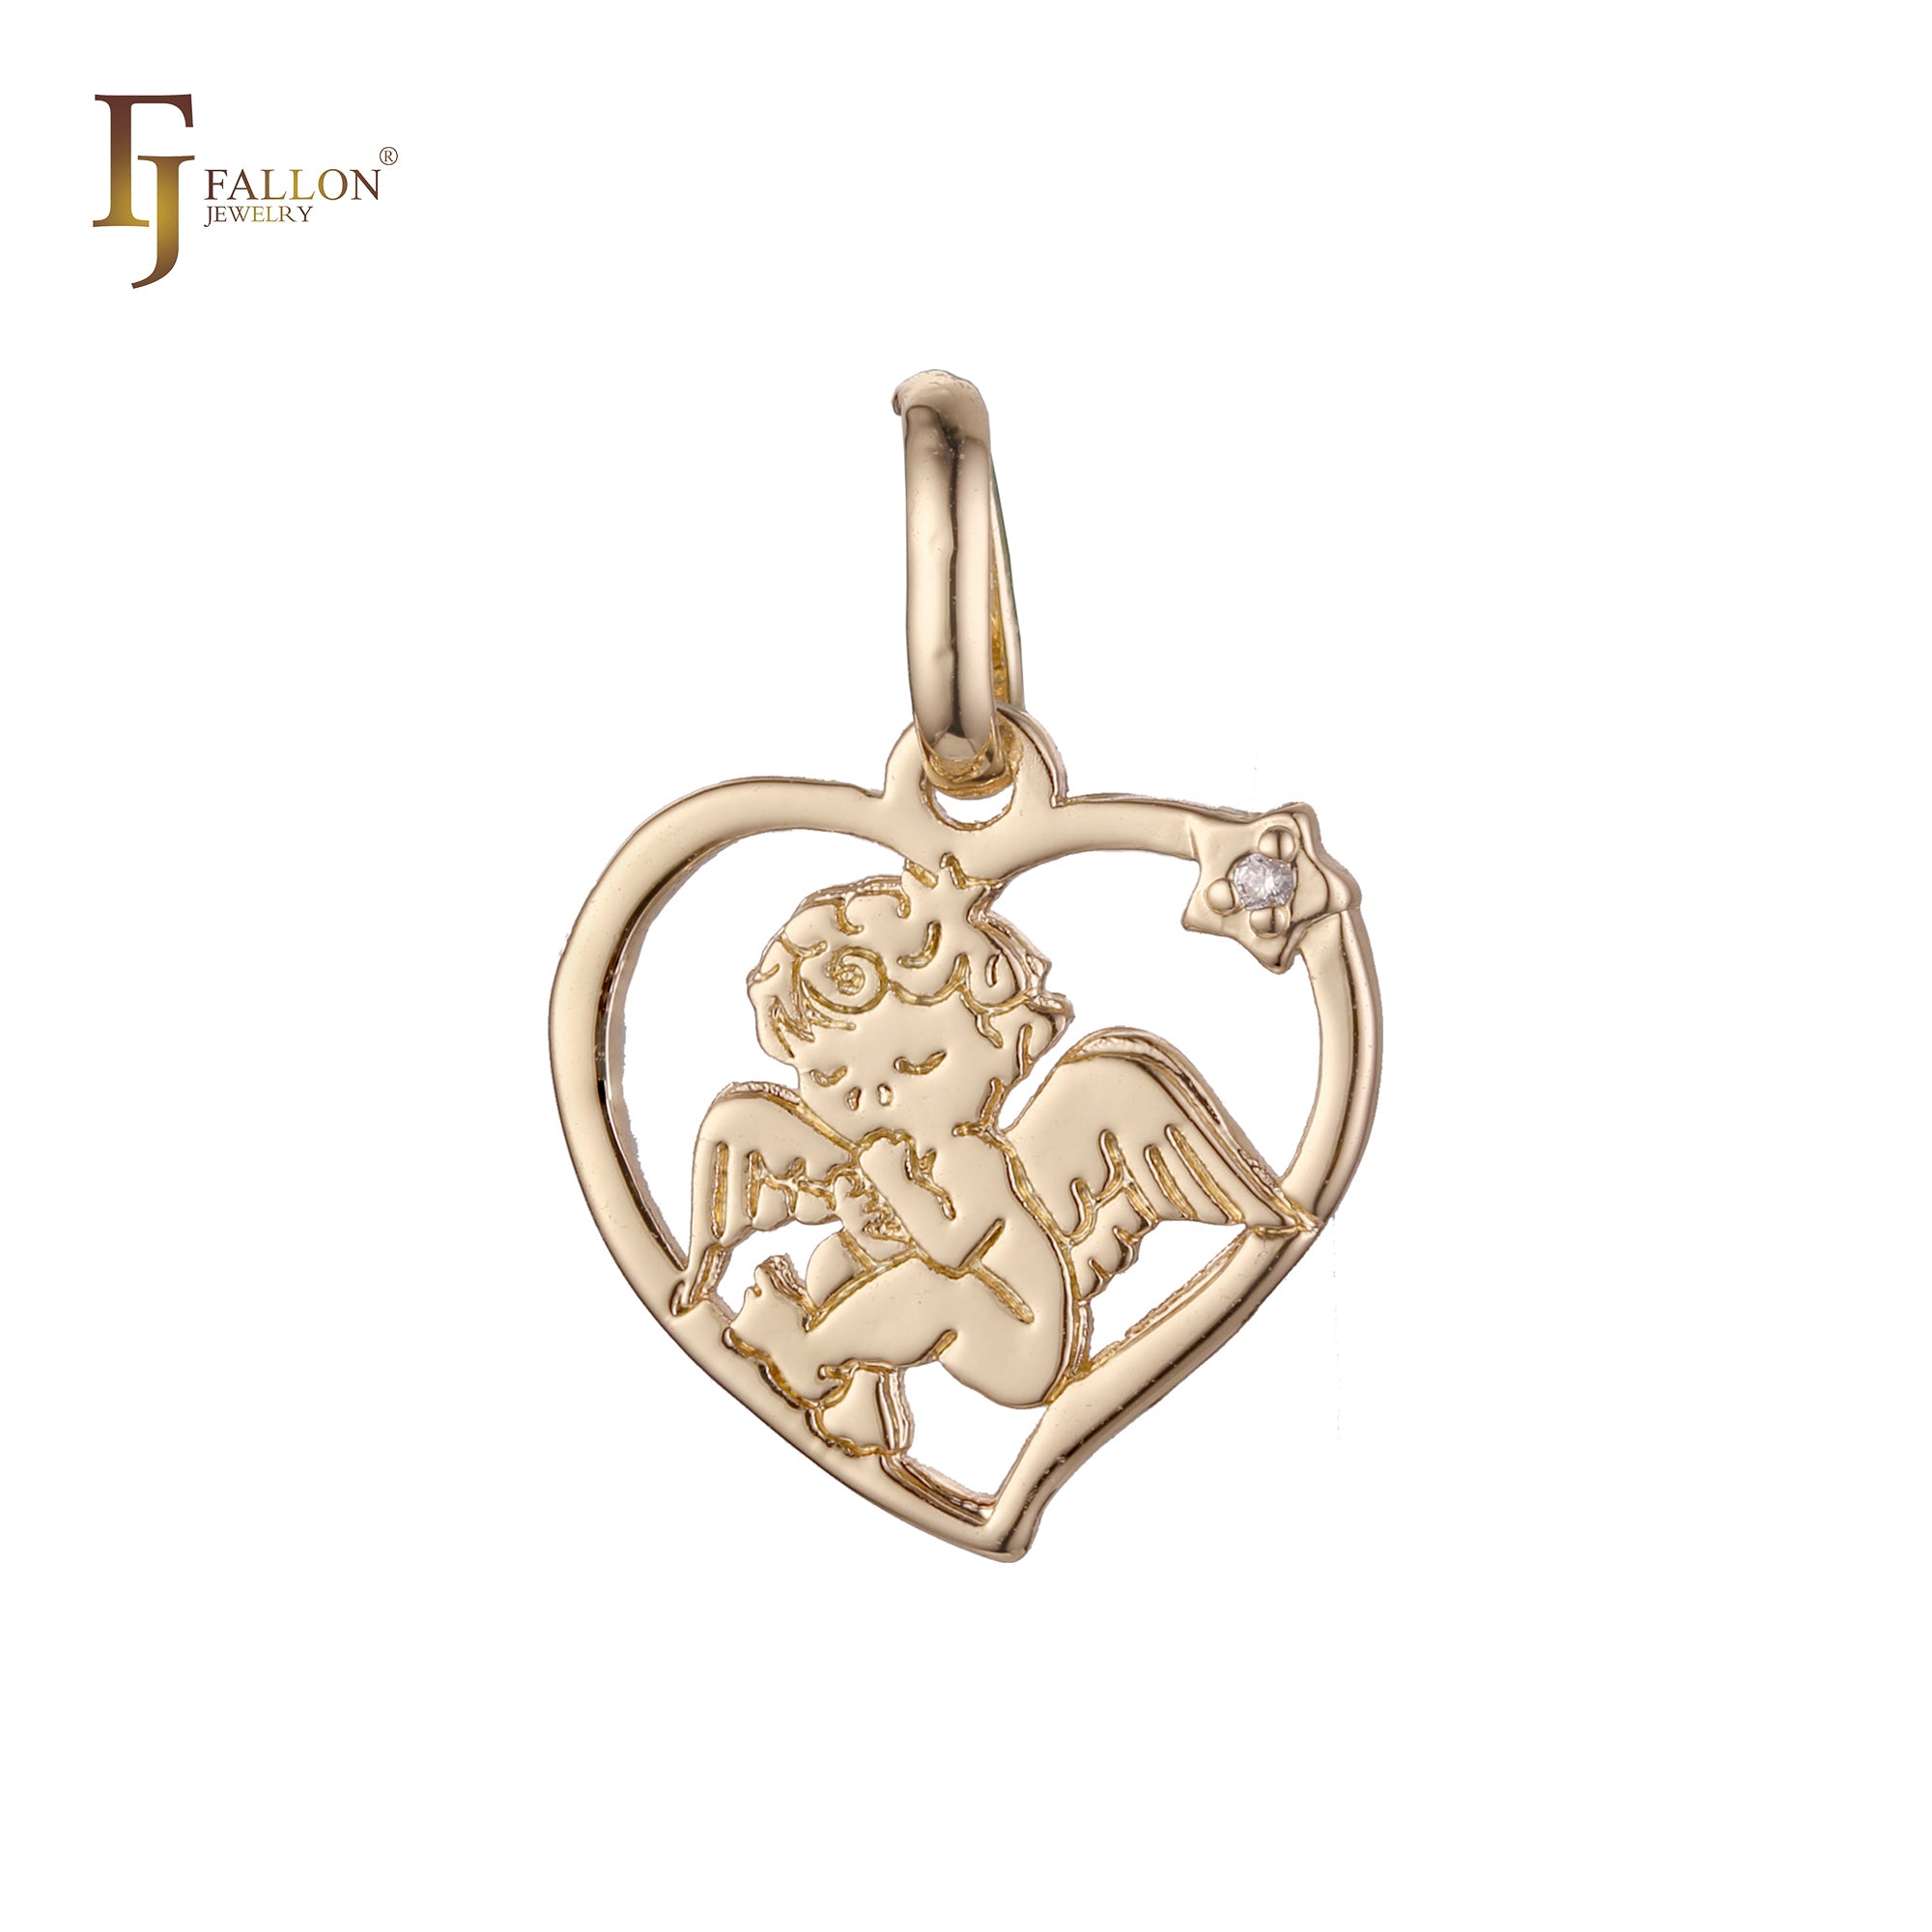 Cupid baby angel Rose Gold, two tone pendant